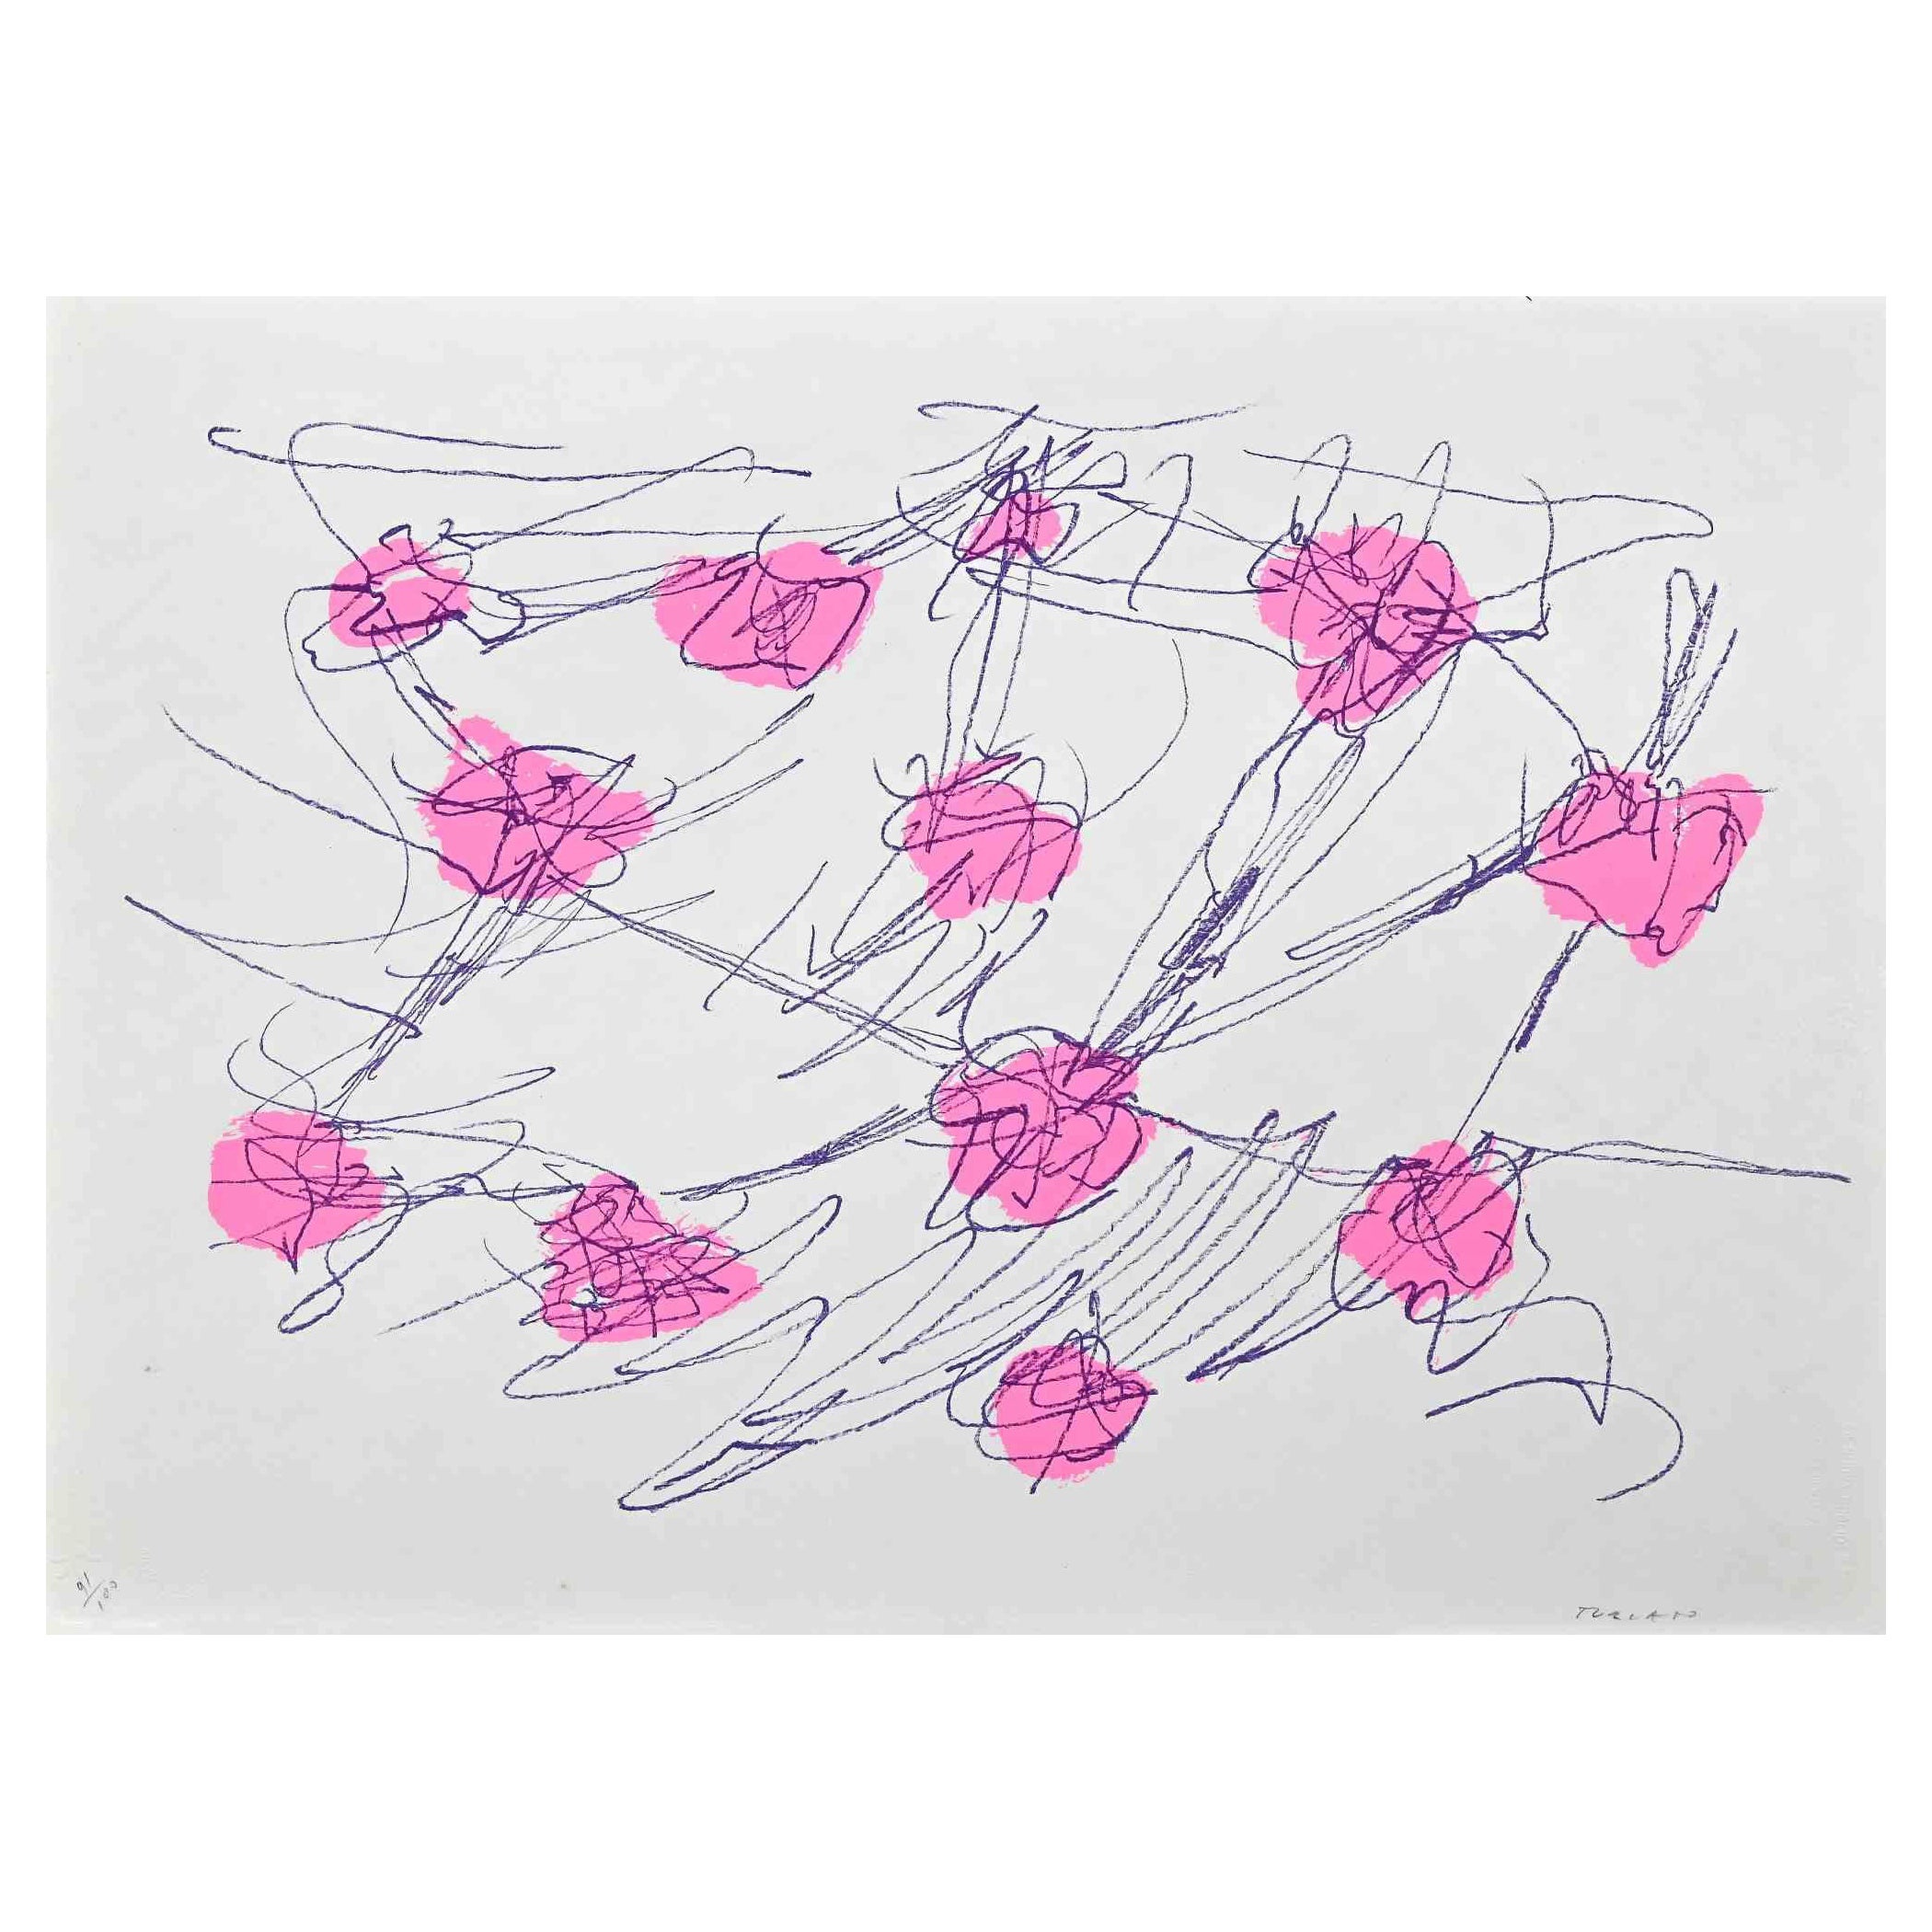 Abstract Composition  is a colored screen print realized by the contemporary artist  Giulio Turcato in 1970s.

Hand-signed  in pencil on the lower right.

Numbered on the lower left margin, edition 91/100.

Free your imagination and discover what